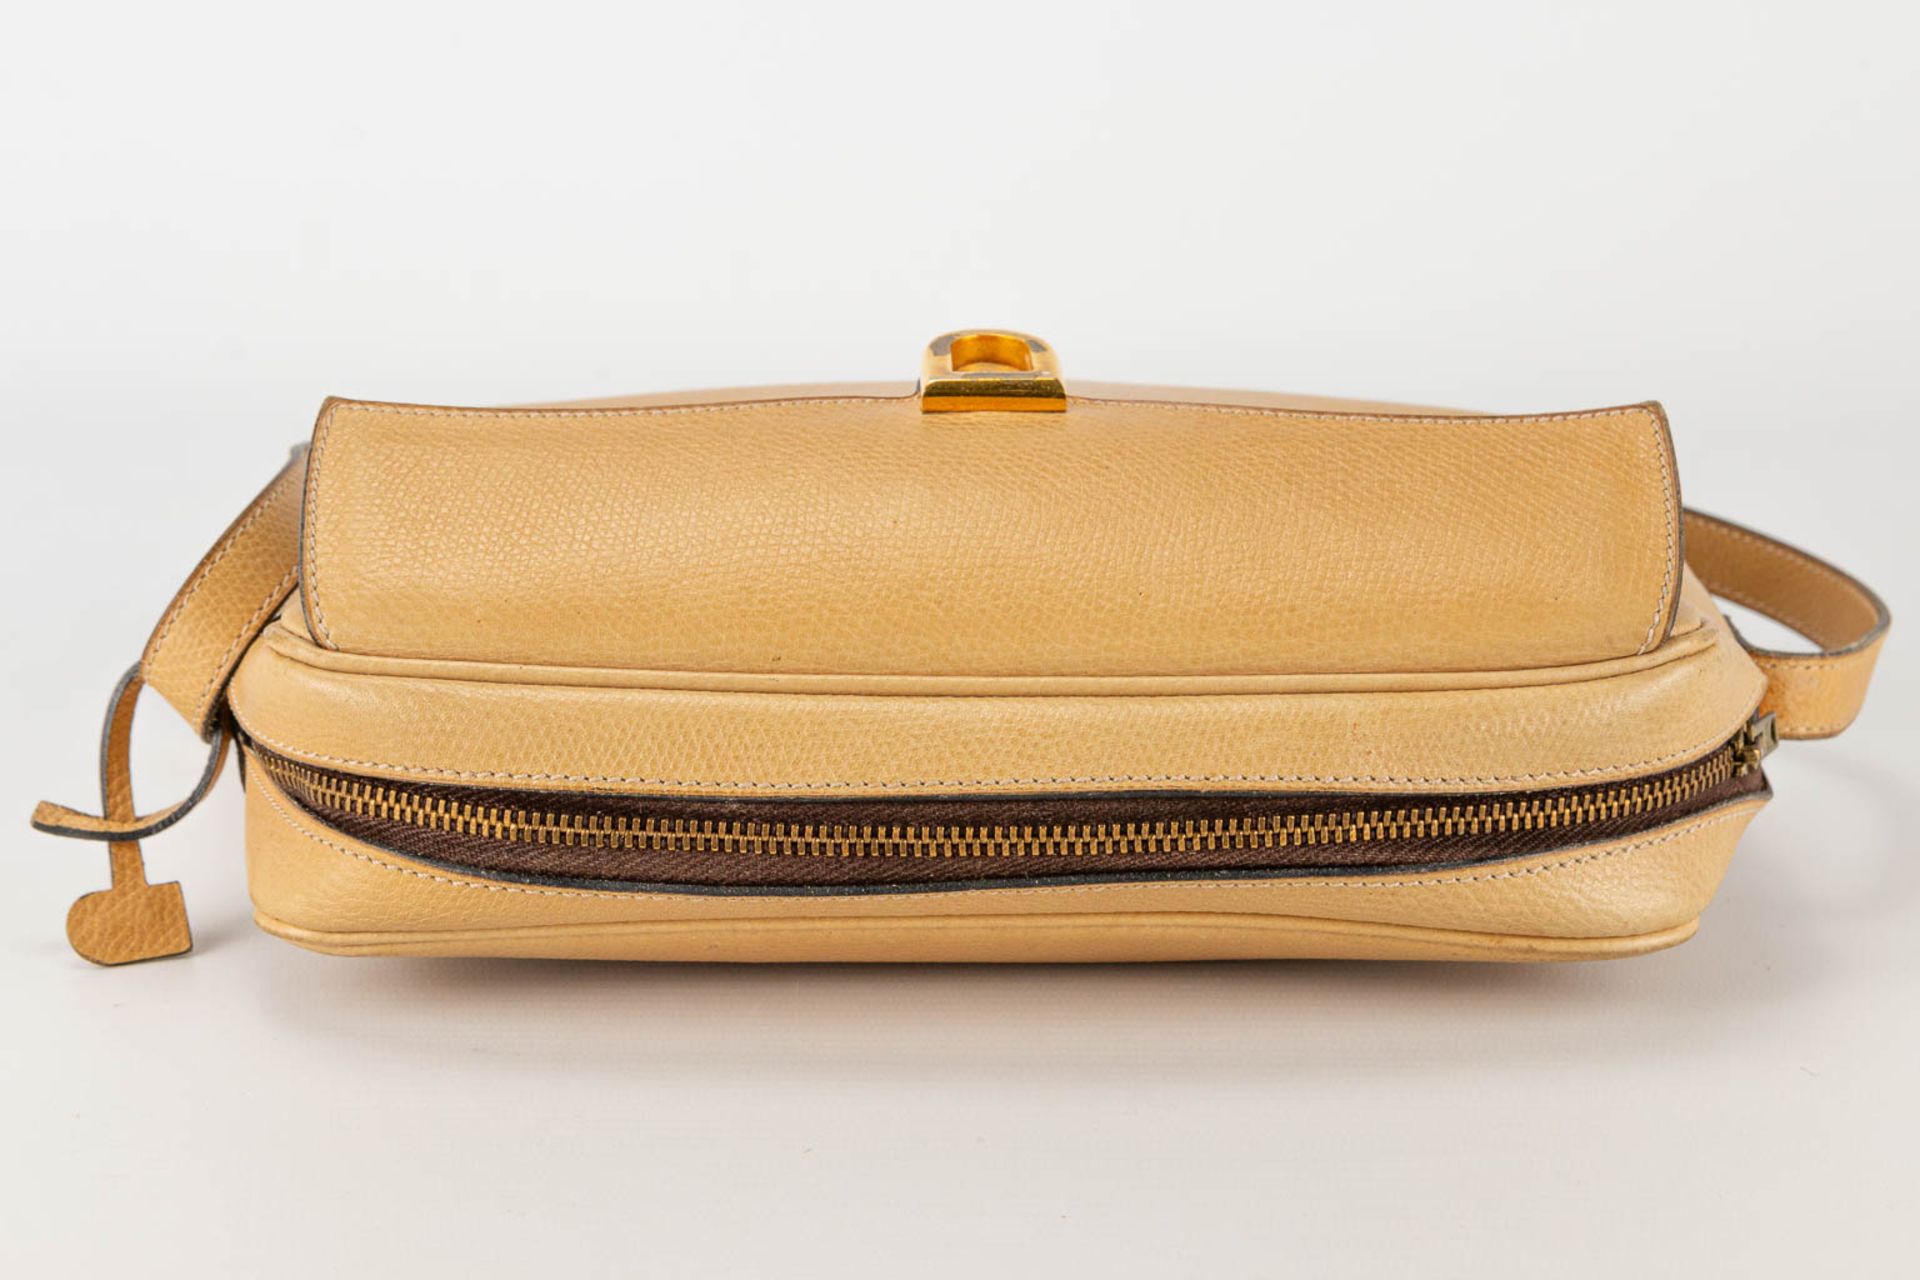 A purse made of brown leather and marked Delvaux. - Image 9 of 14